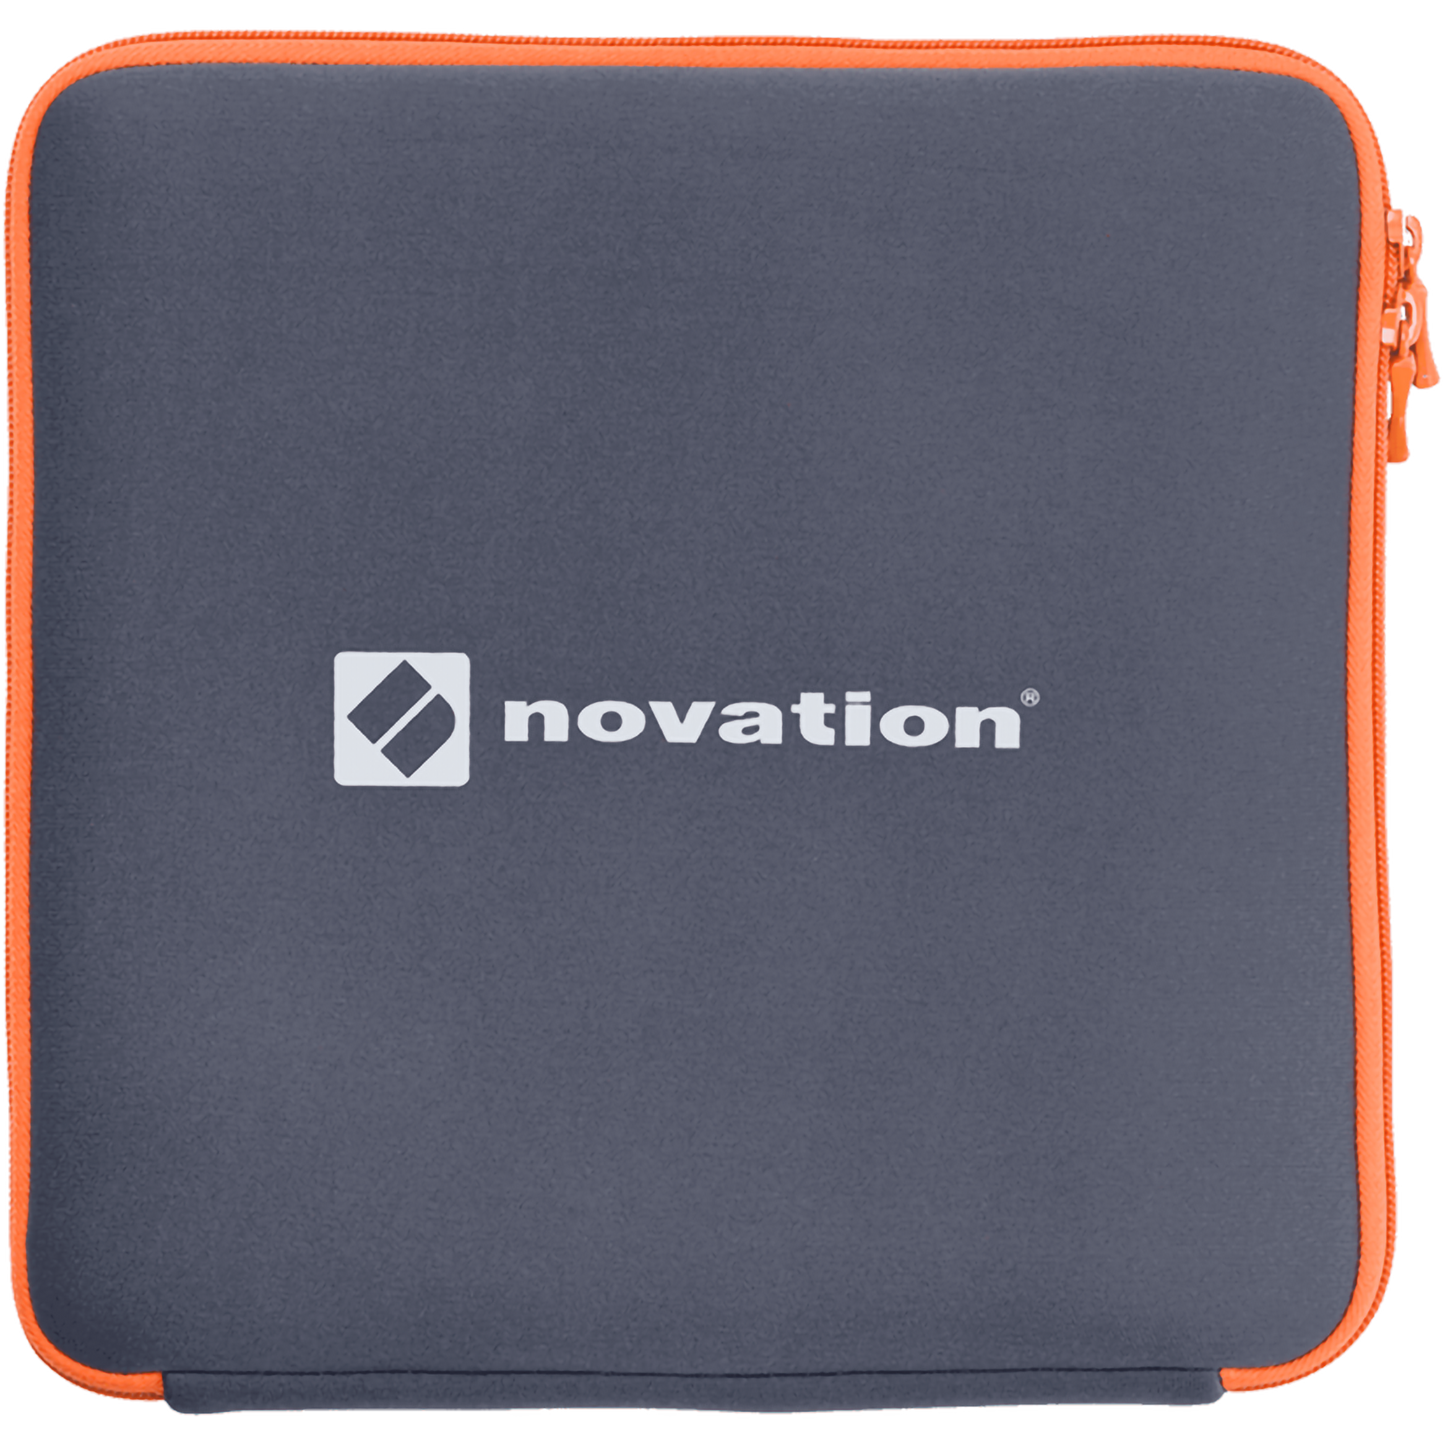 Novation Launchpad and Launch Control Sleeve